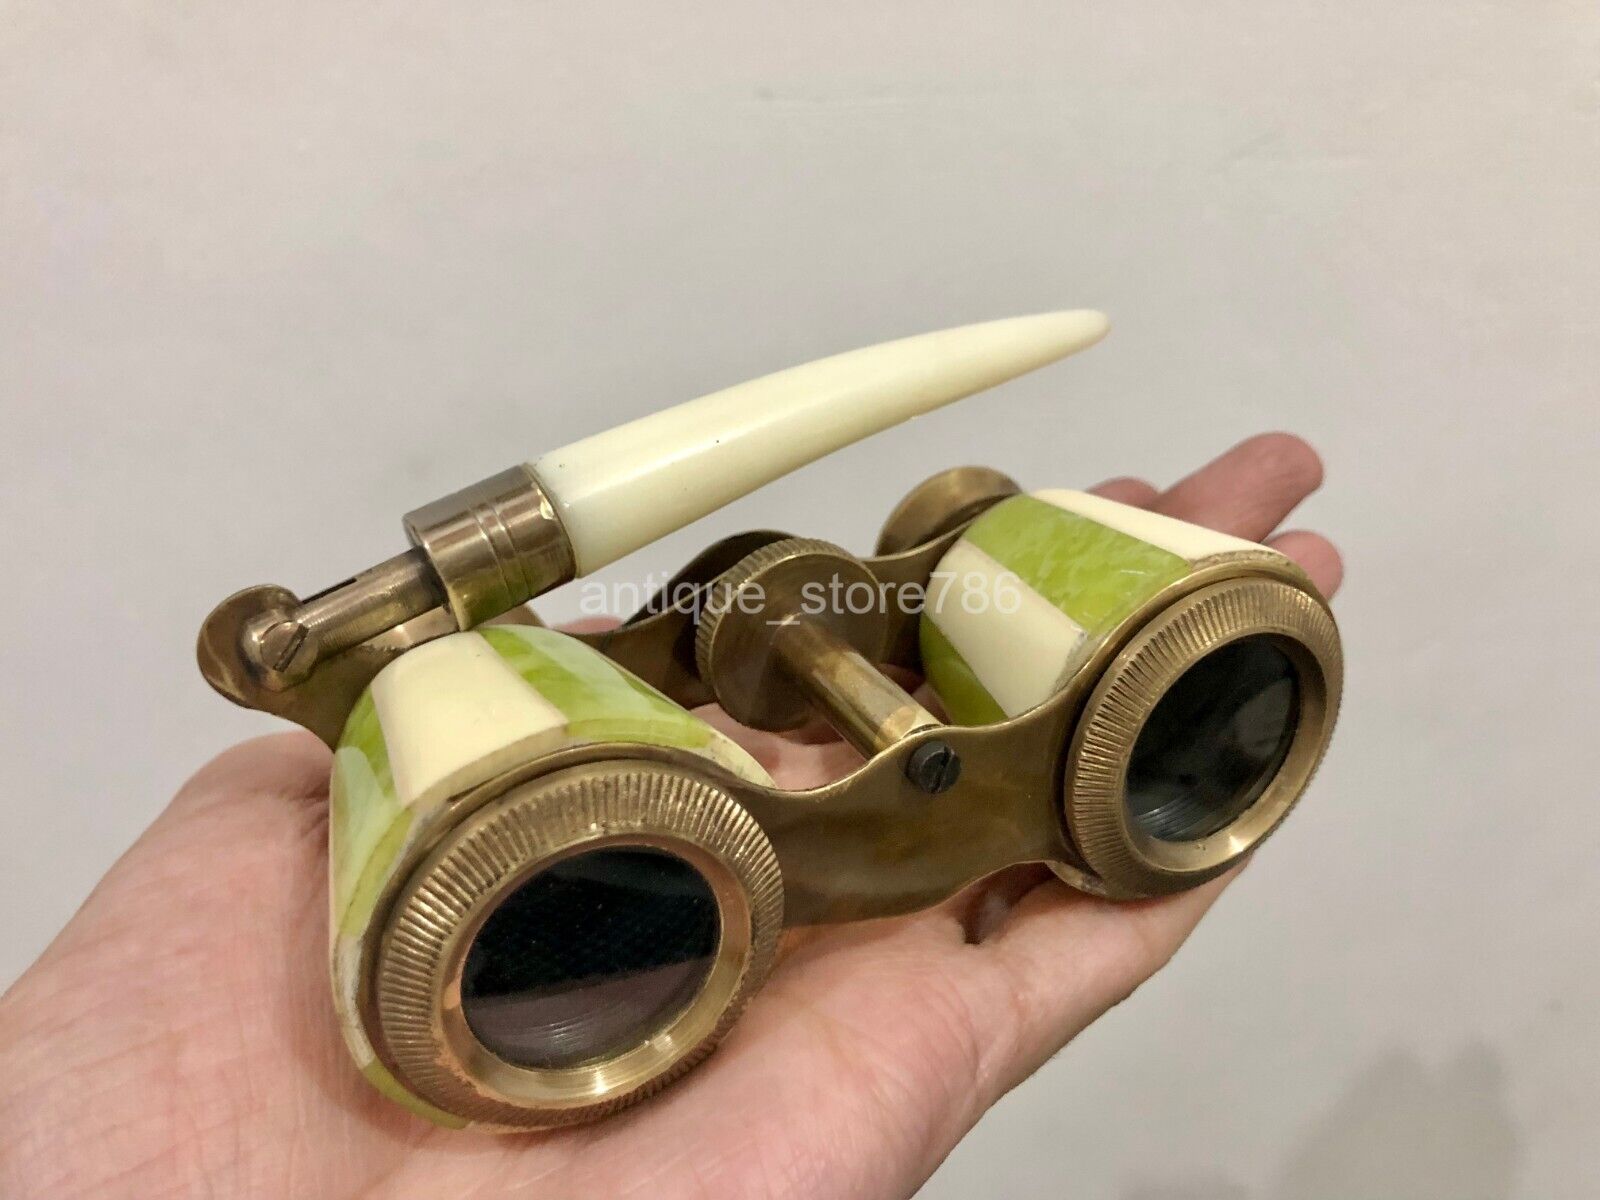 Antique Brass Opera Binoculars with Mother of Pearl Accents for Bird Watching